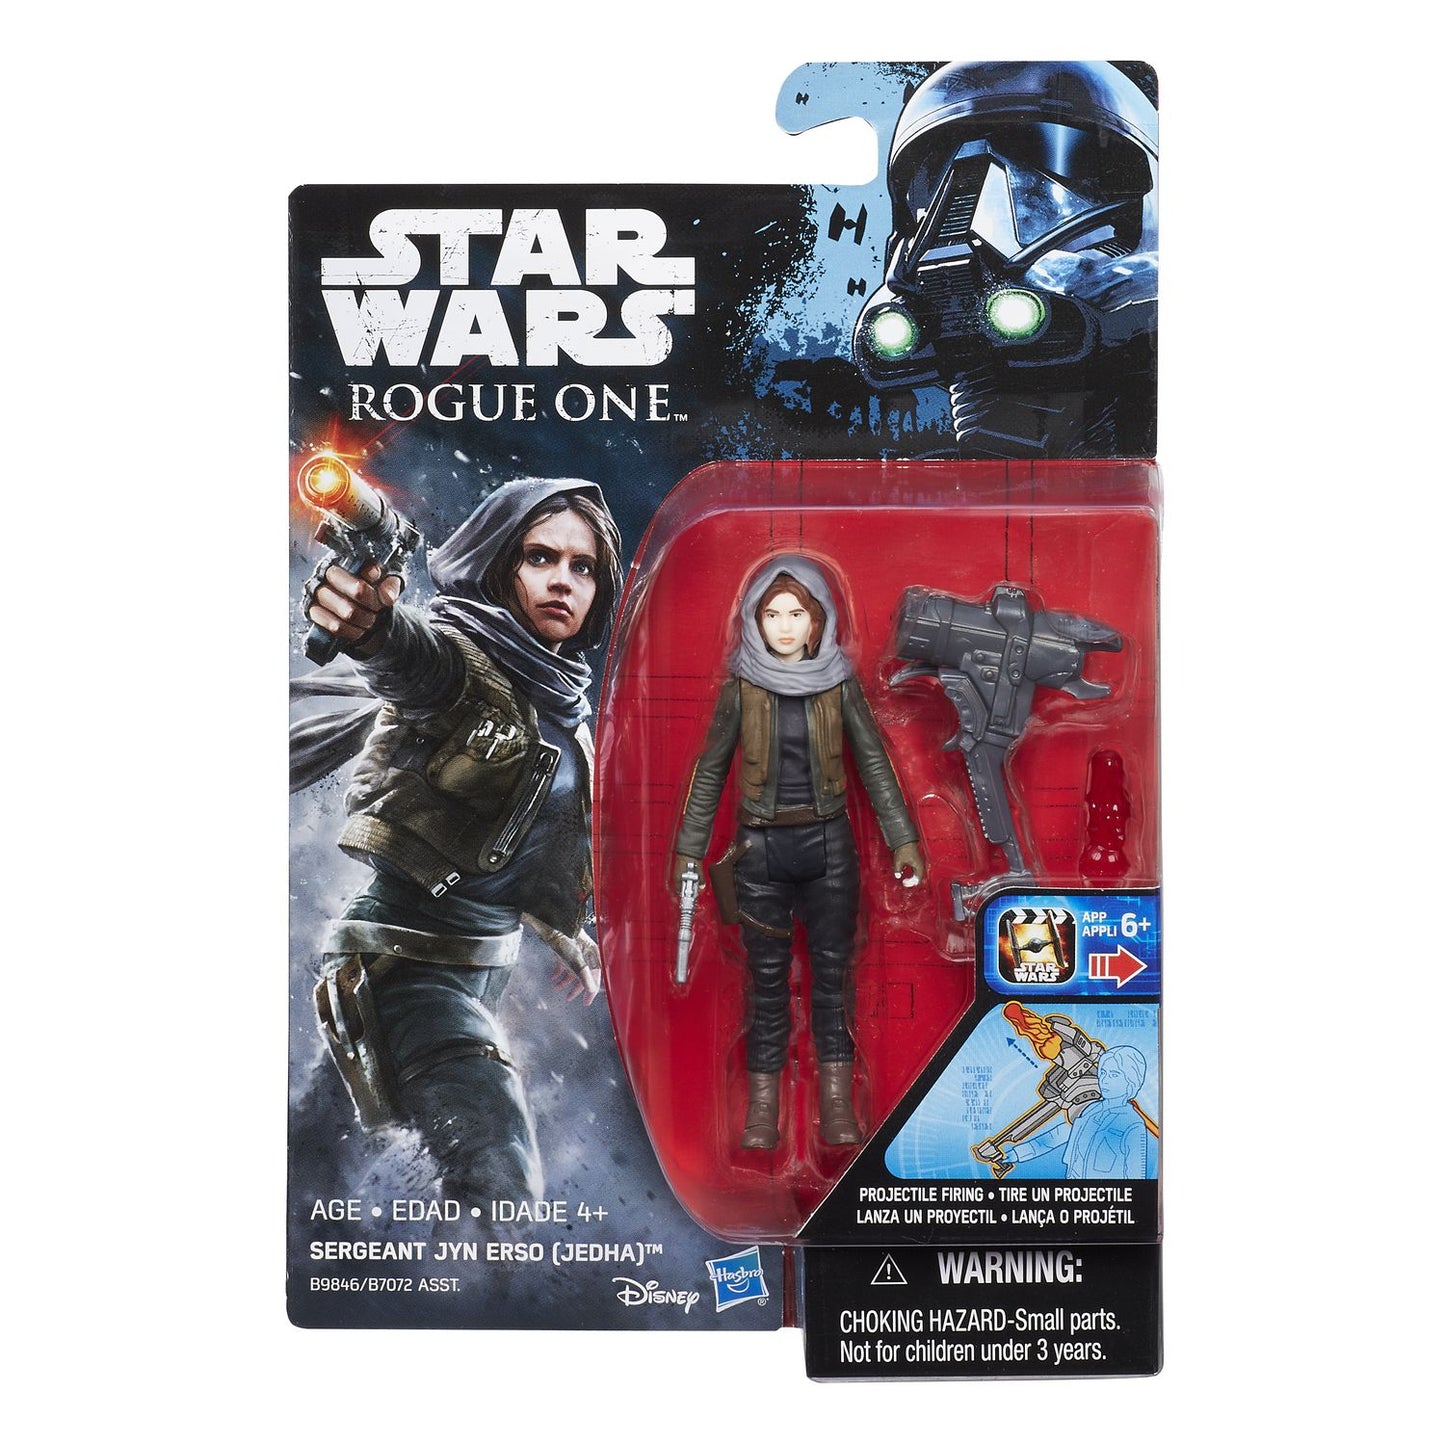 Star Wars Rogue One Sergeant Jyn Erso (Jedha) 3.75" Action Figure